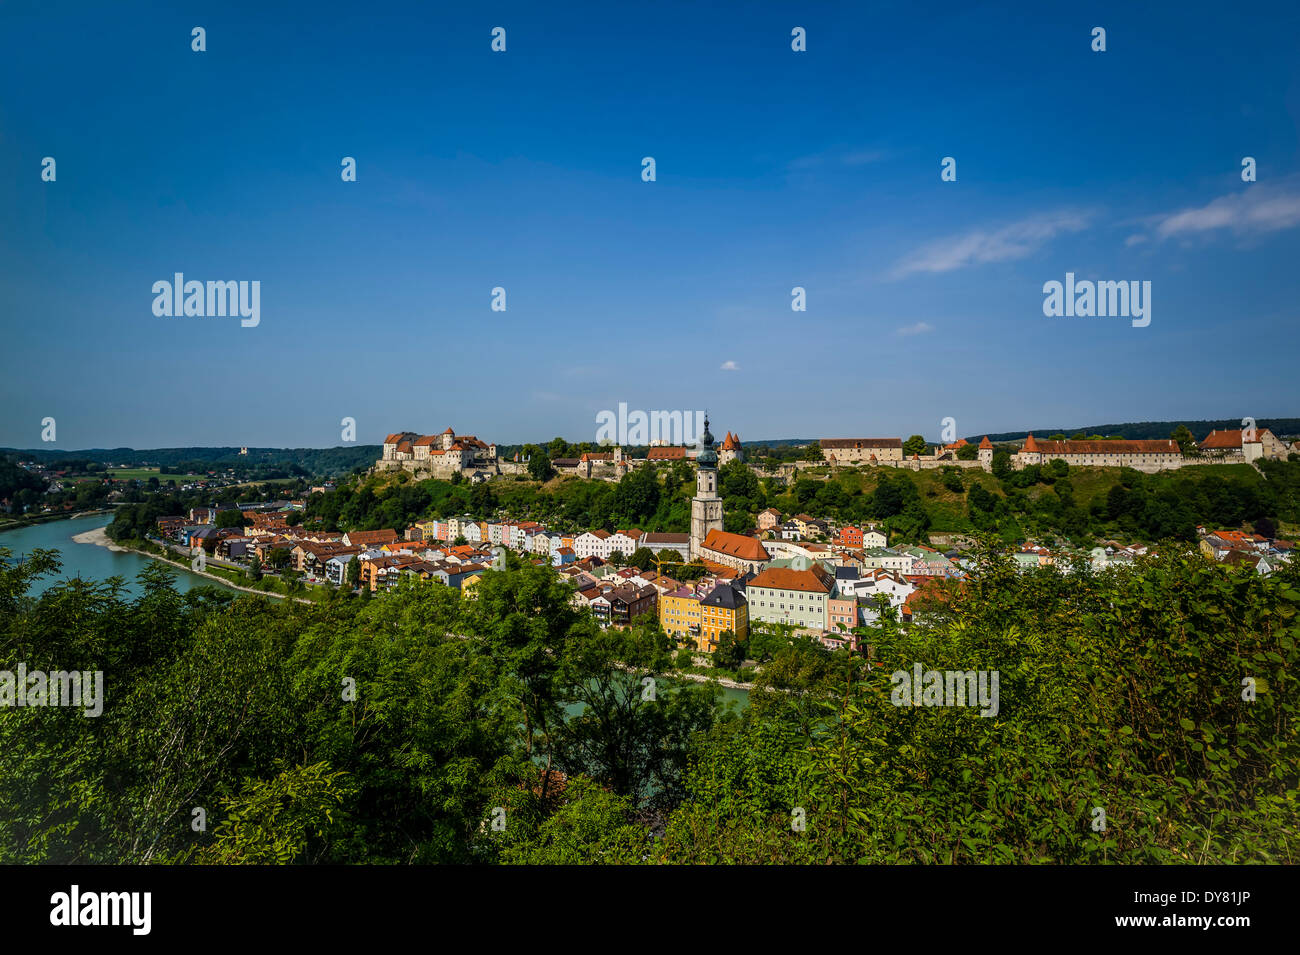 Germany, Bavaria, Burghausen, Cityscape with castle and church Stock Photo